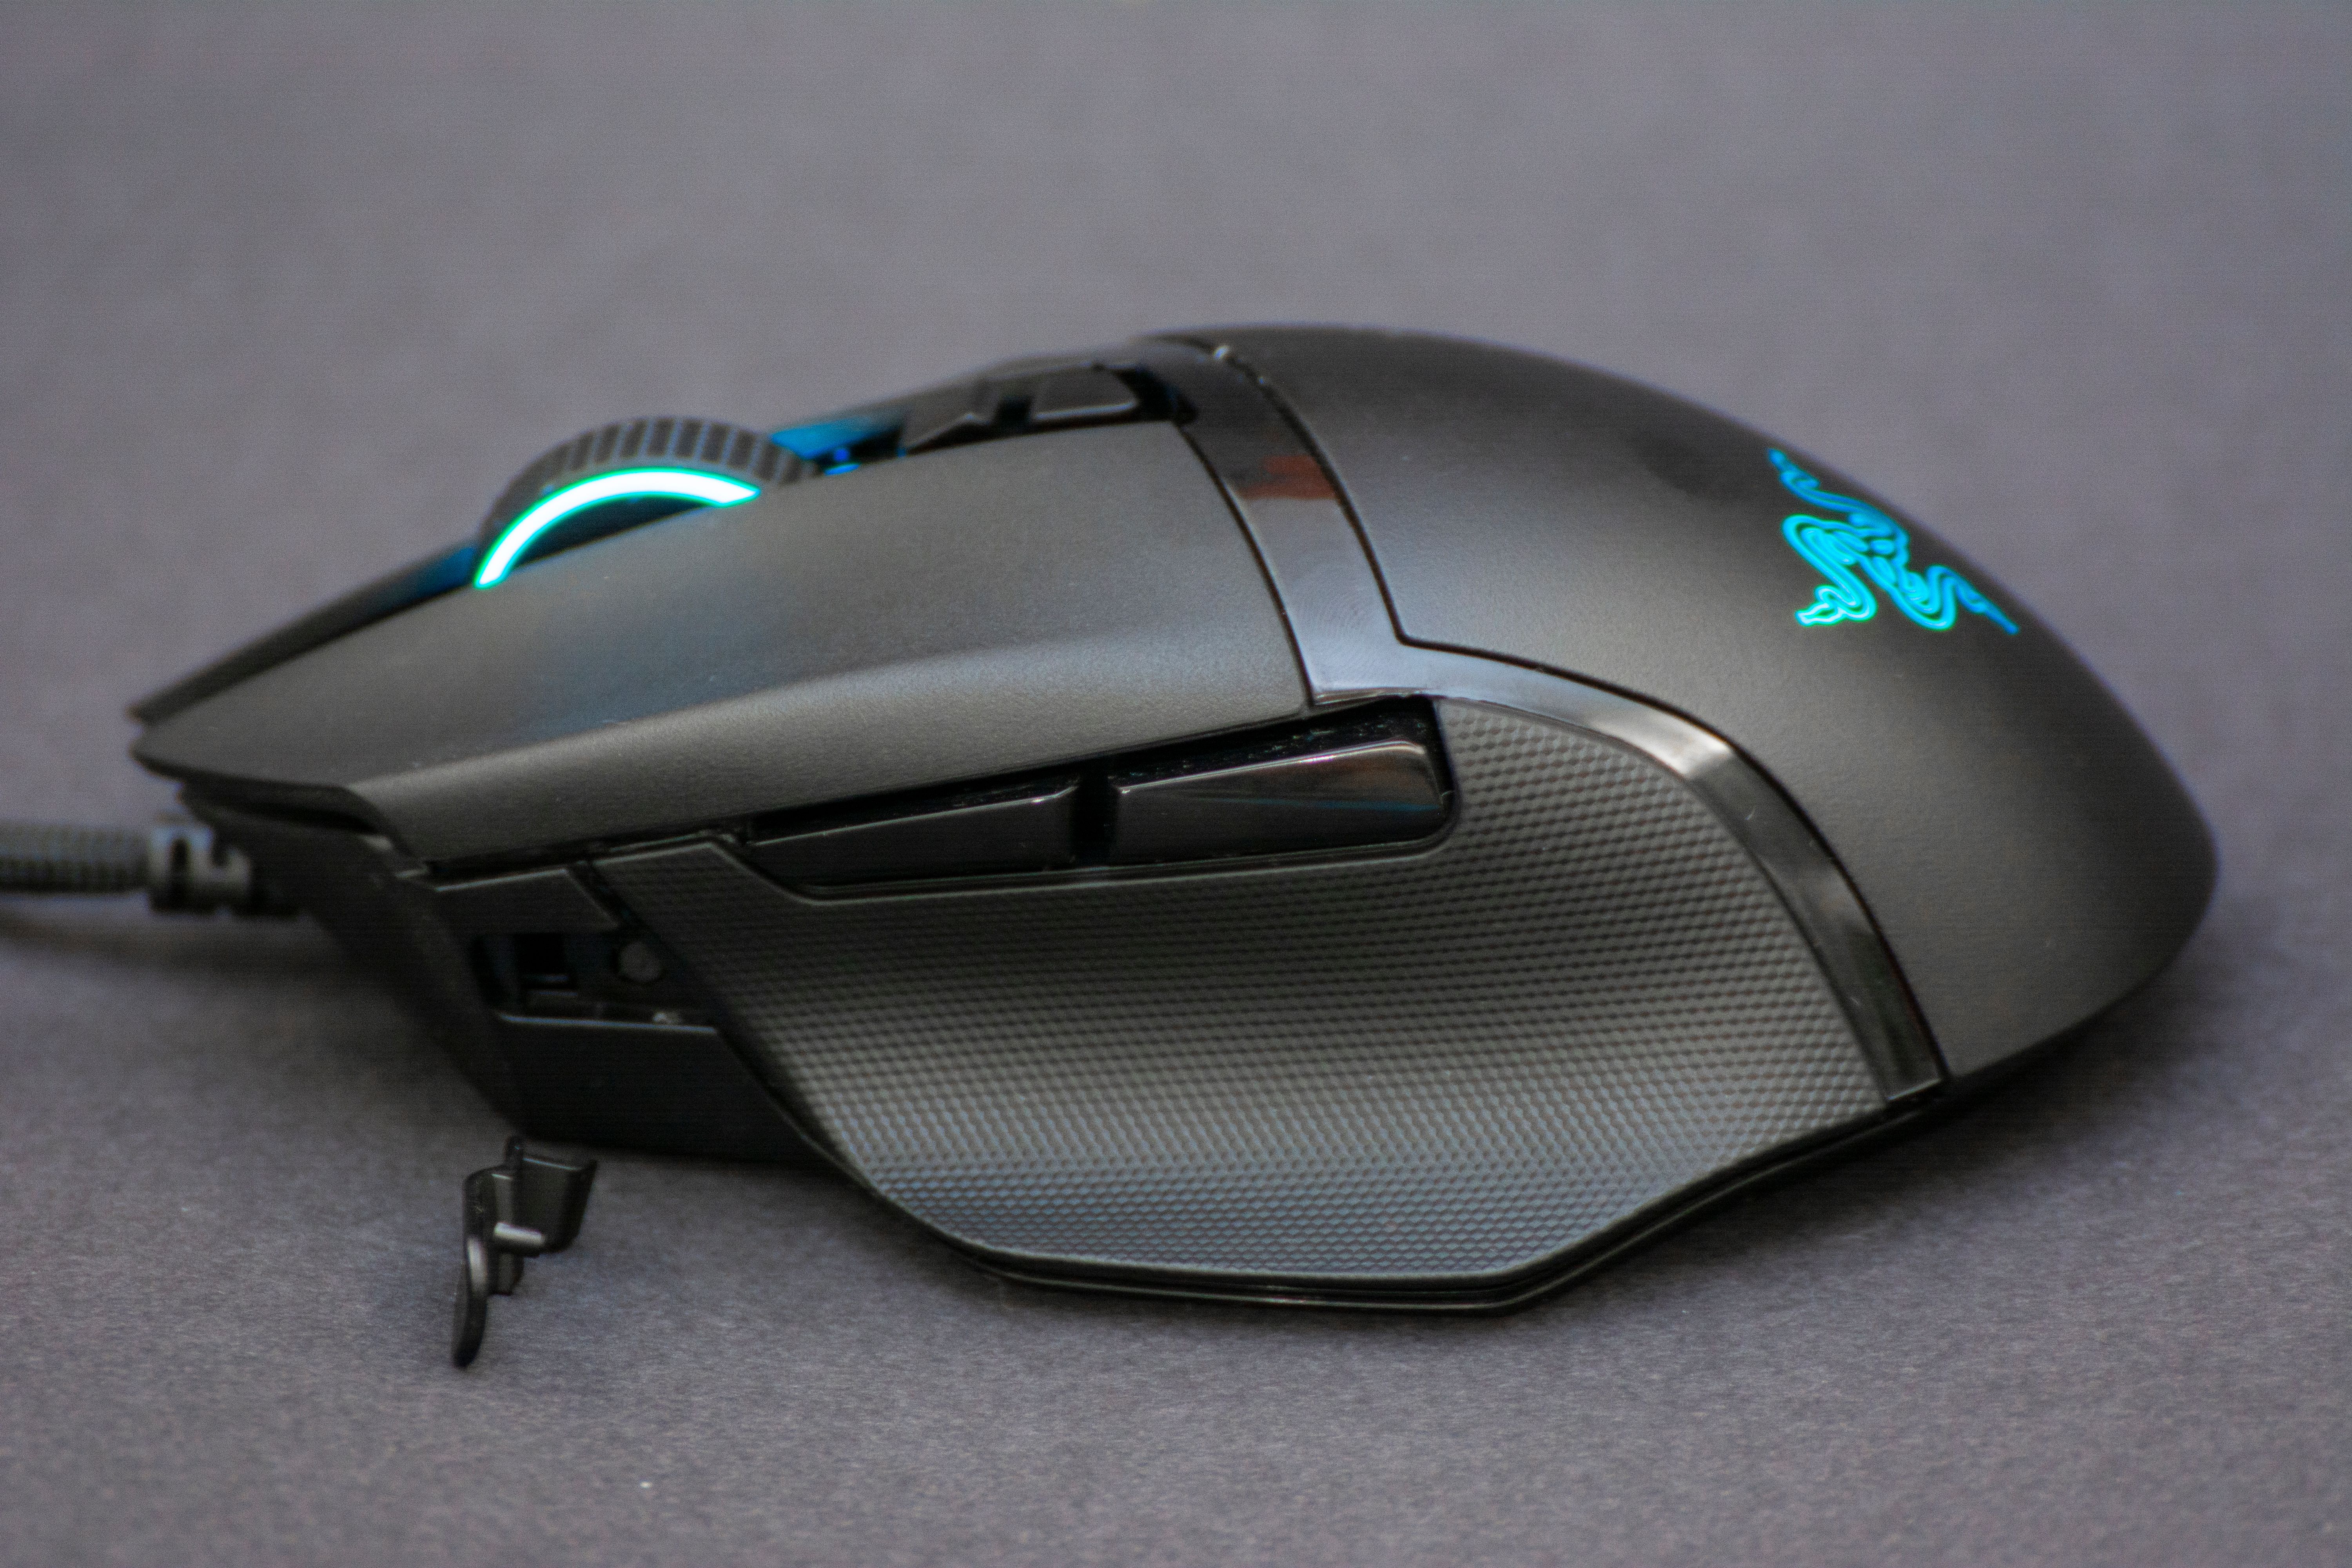 A mouse with a DPI button